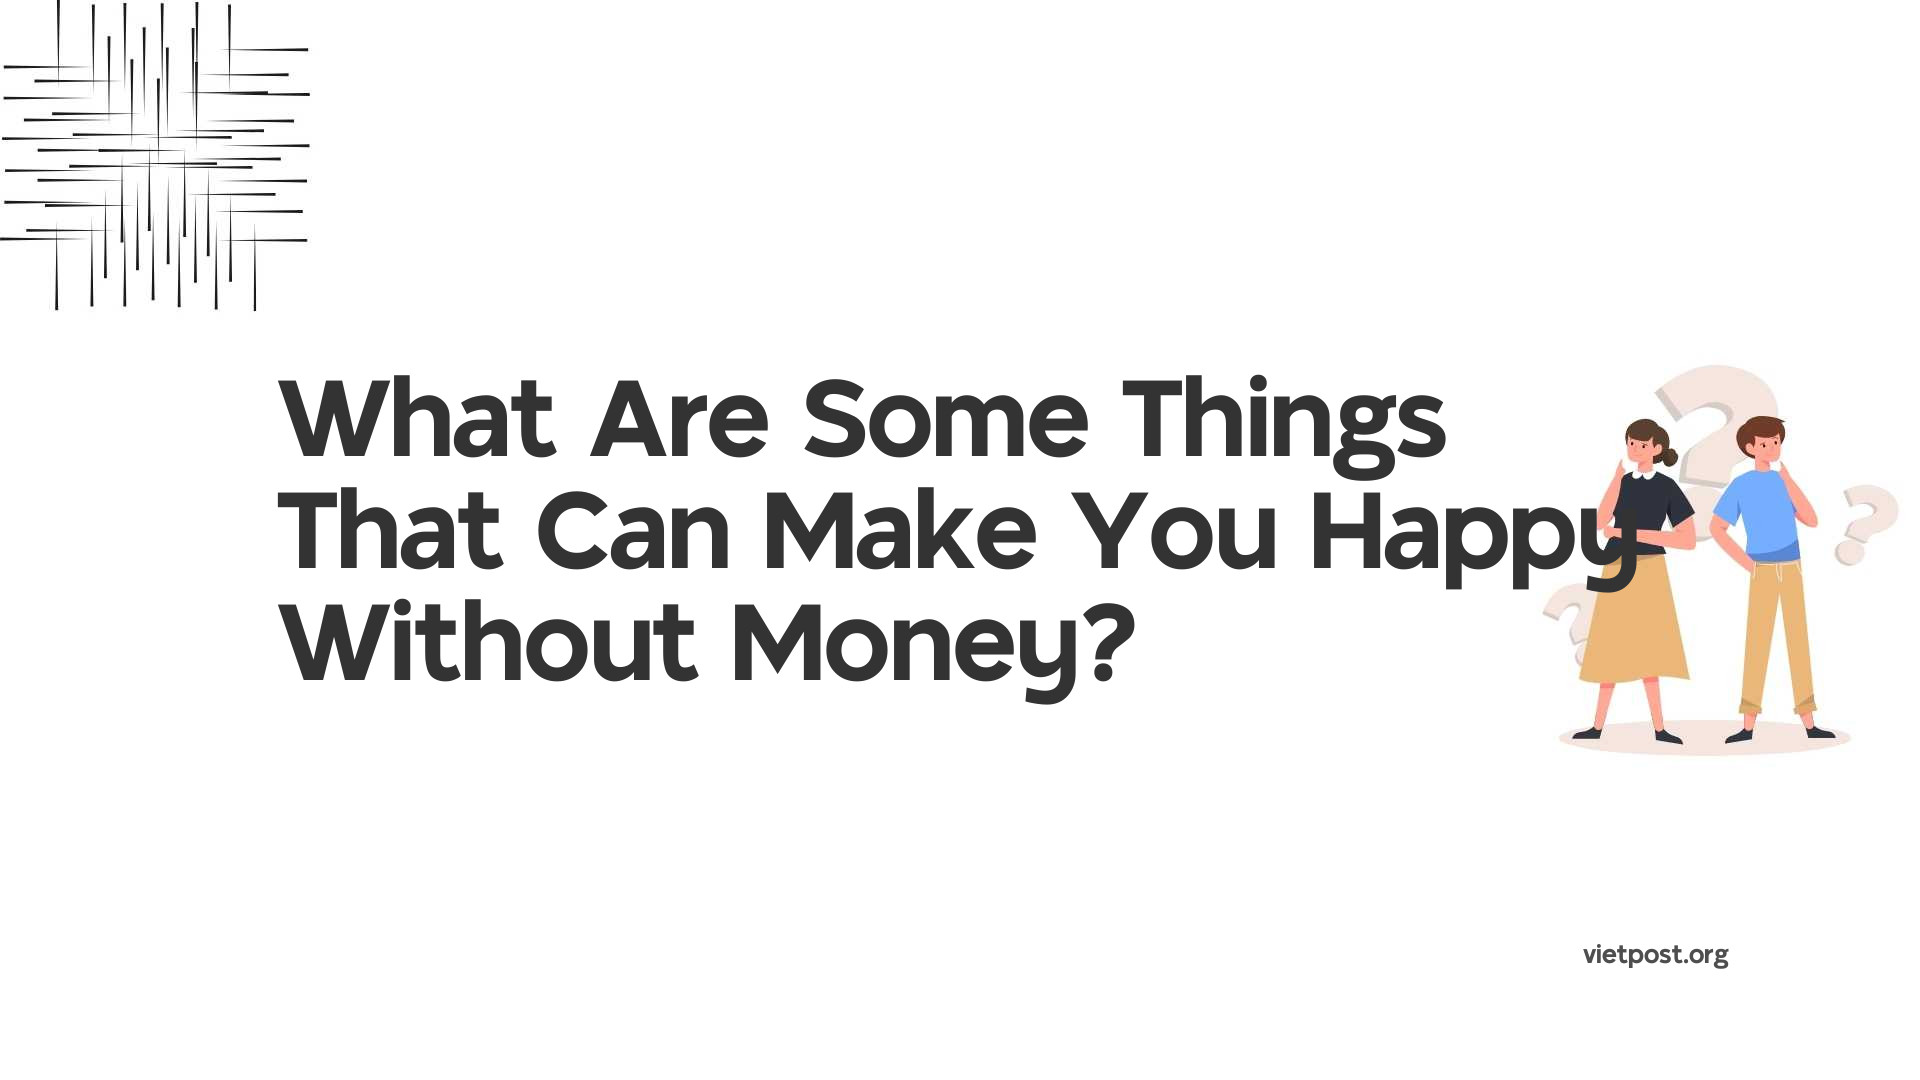 What Are Some Things That Can Make You Happy Without Money?